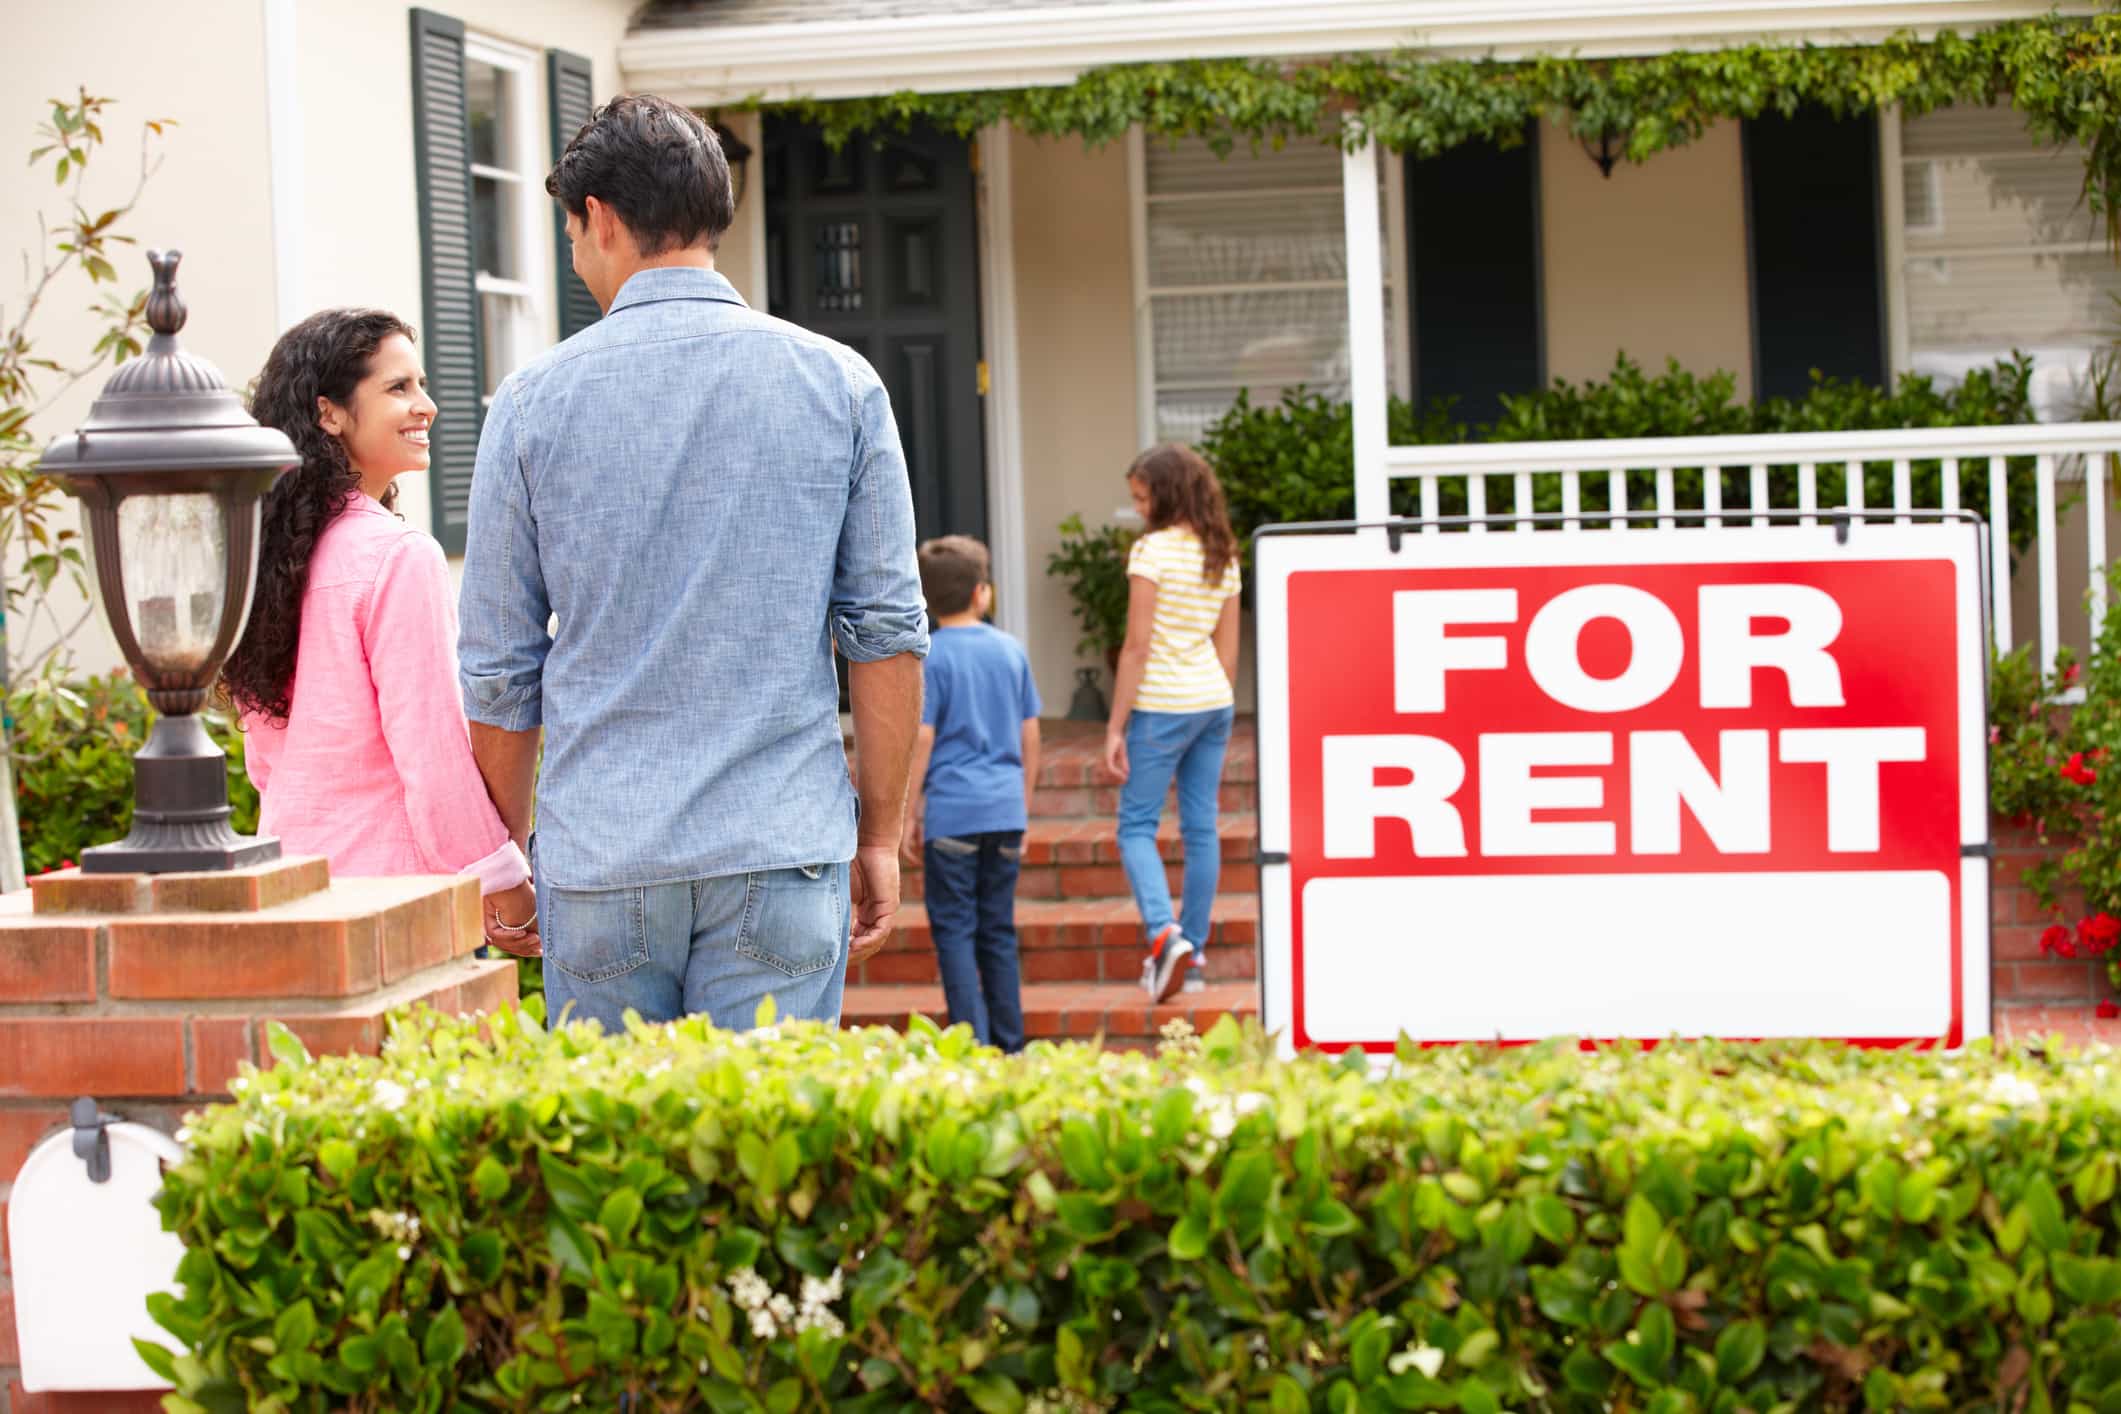 family outside house with "for rent" sign